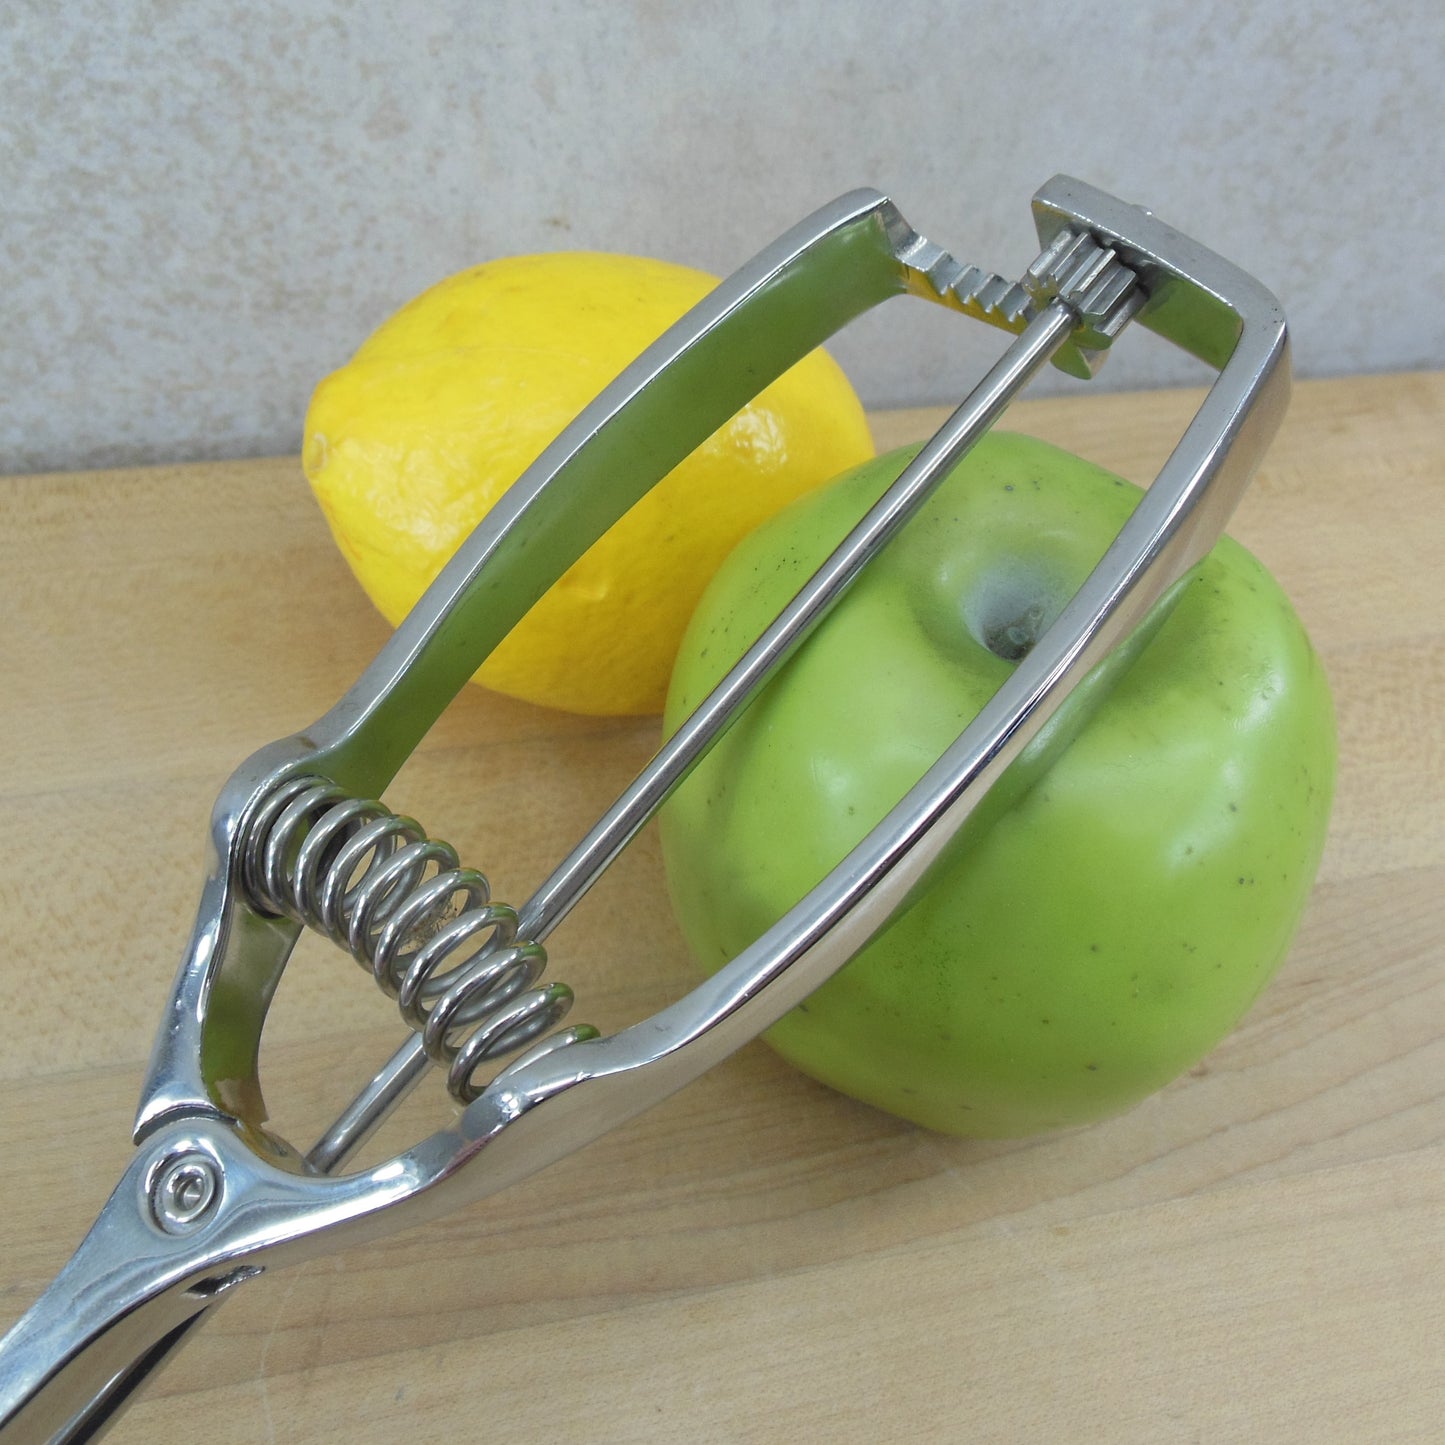 Unbranded Melon Baller Food Portion Scoop - Stainless 30 mm 1-1/4" used